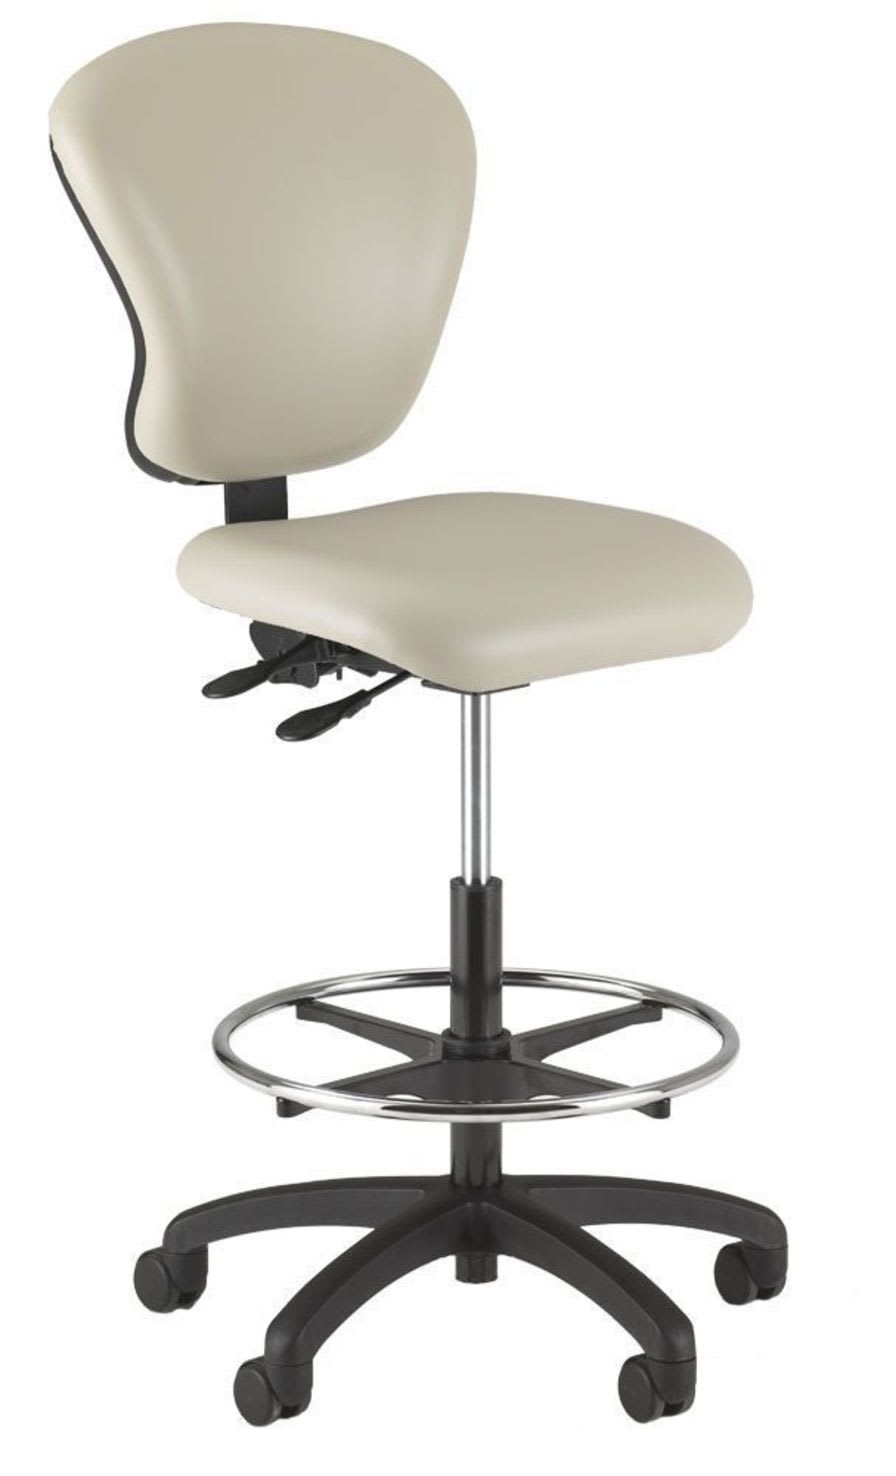 Medical stool / height-adjustable / on casters / with backrest 851CF Intensa